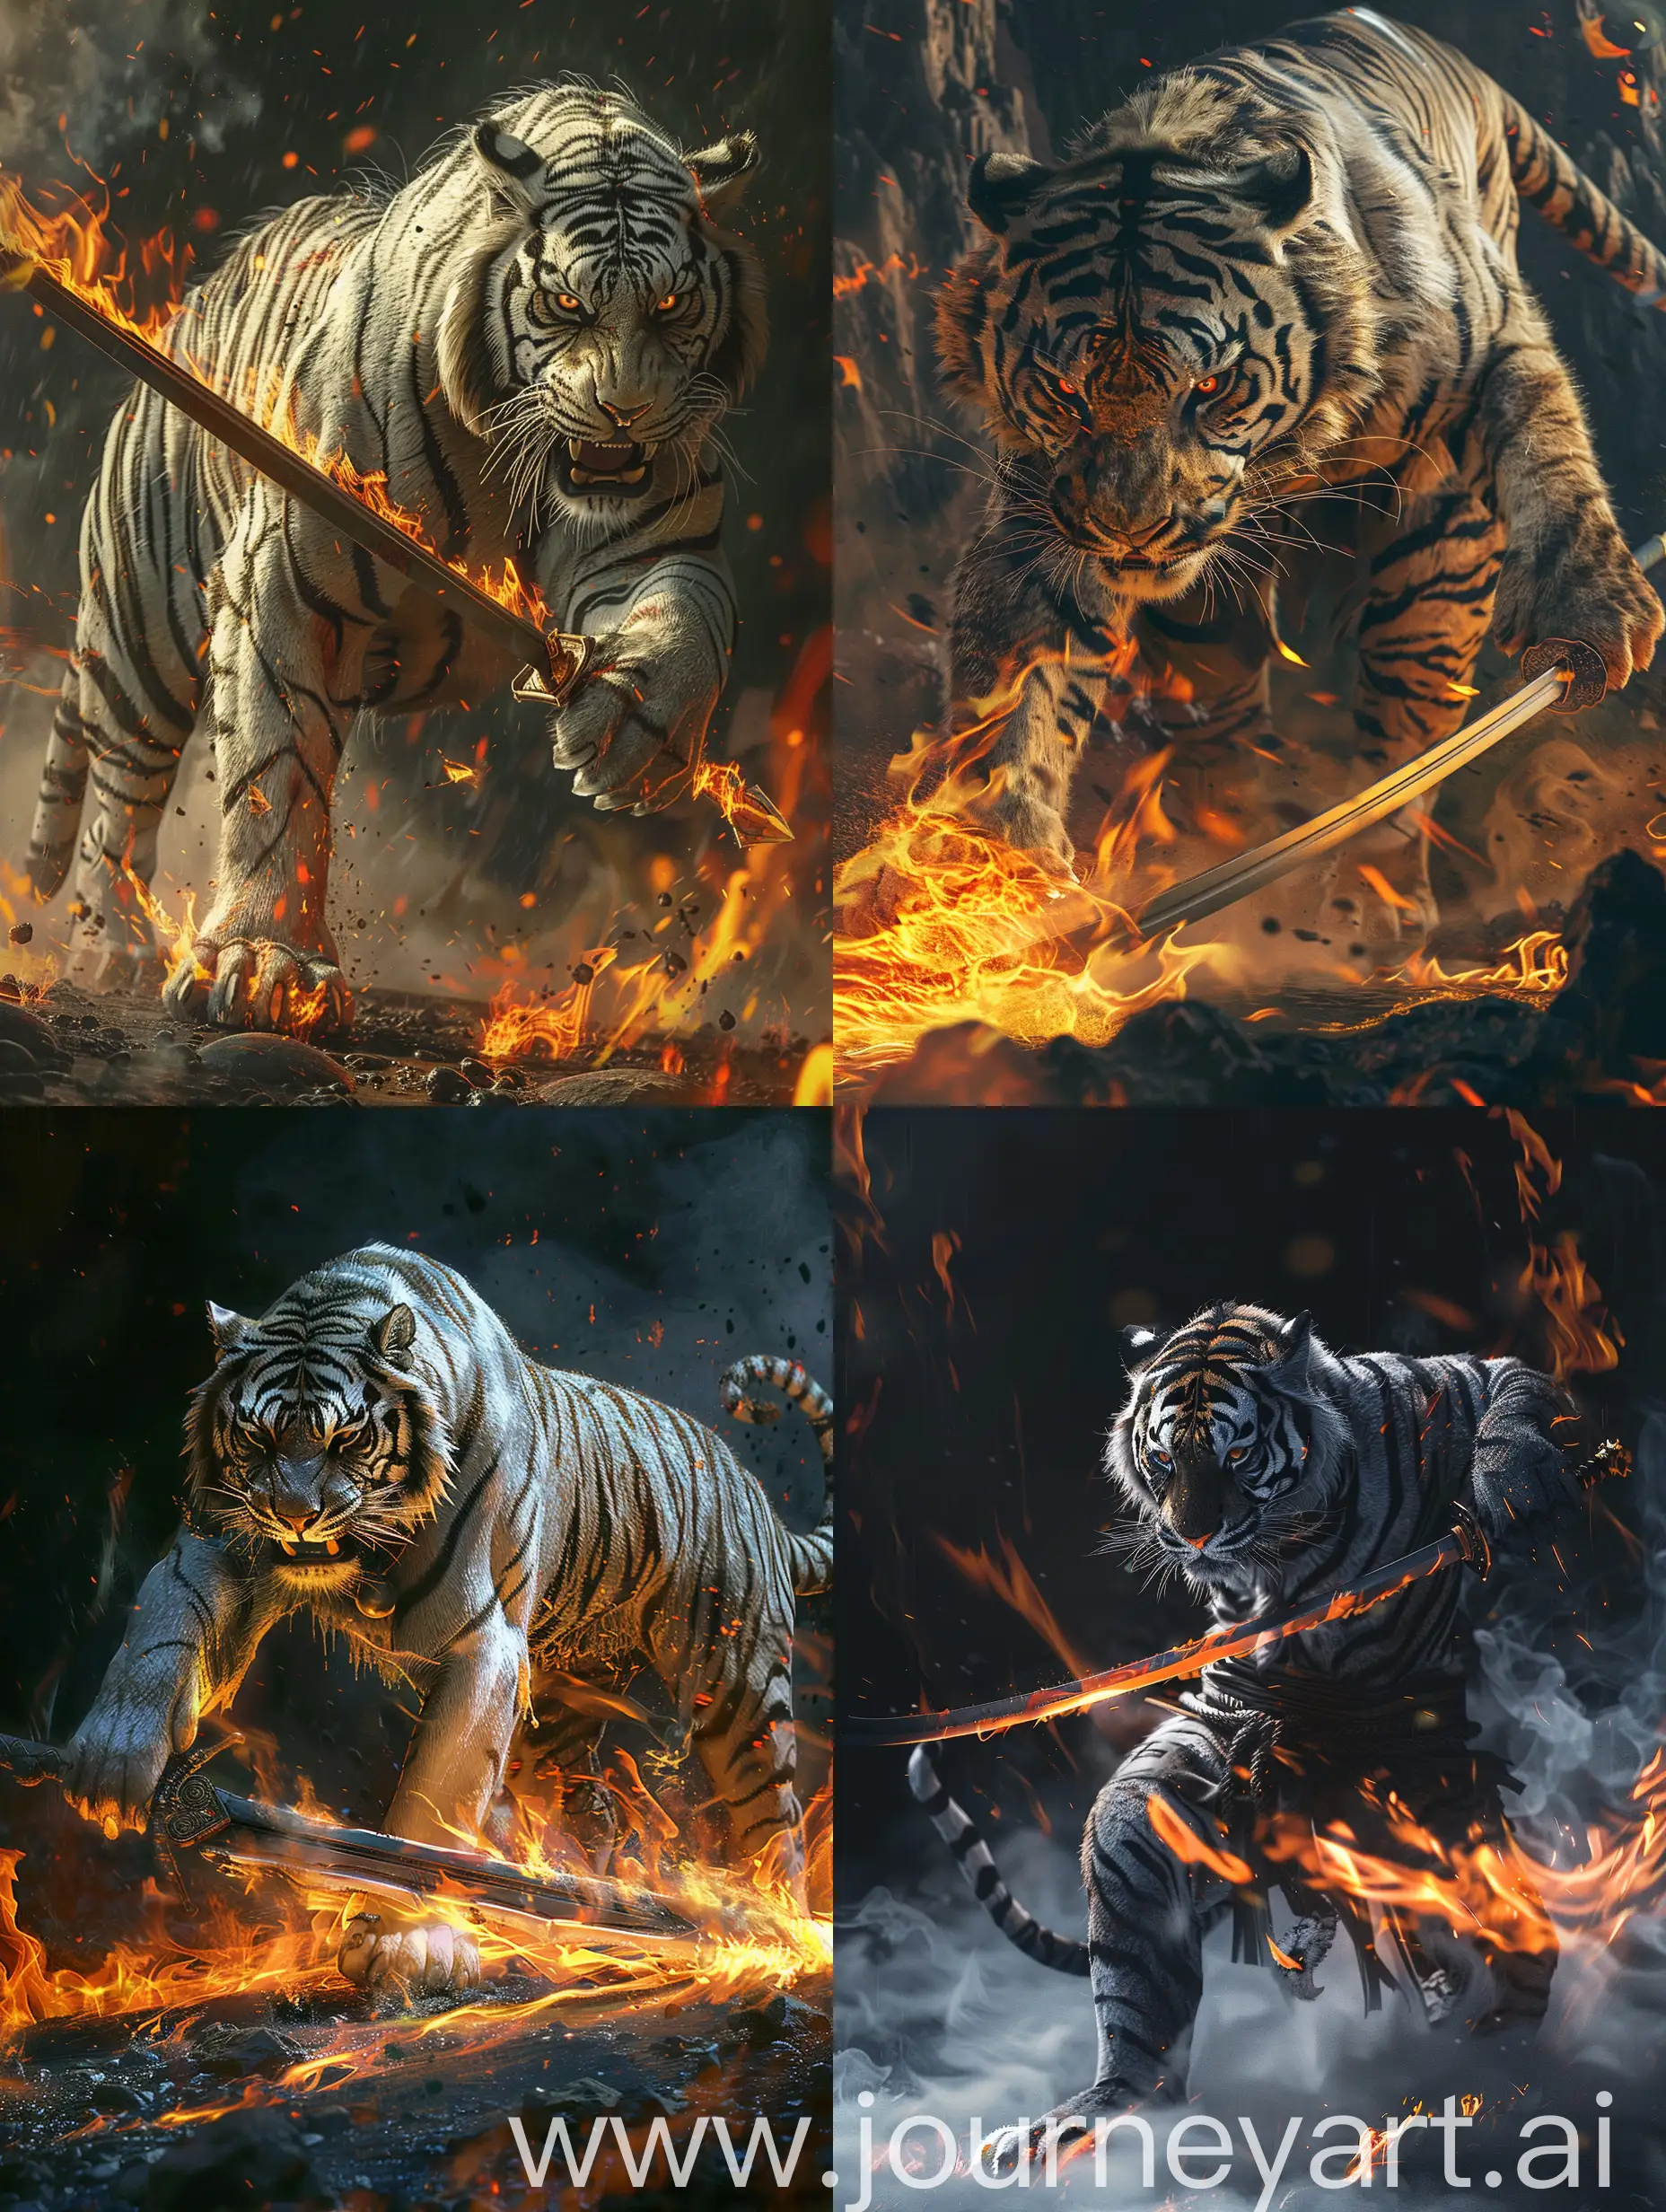 Tiger-Warrior-Battles-Fire-with-Sword-in-Unreal-Engine-5-Style